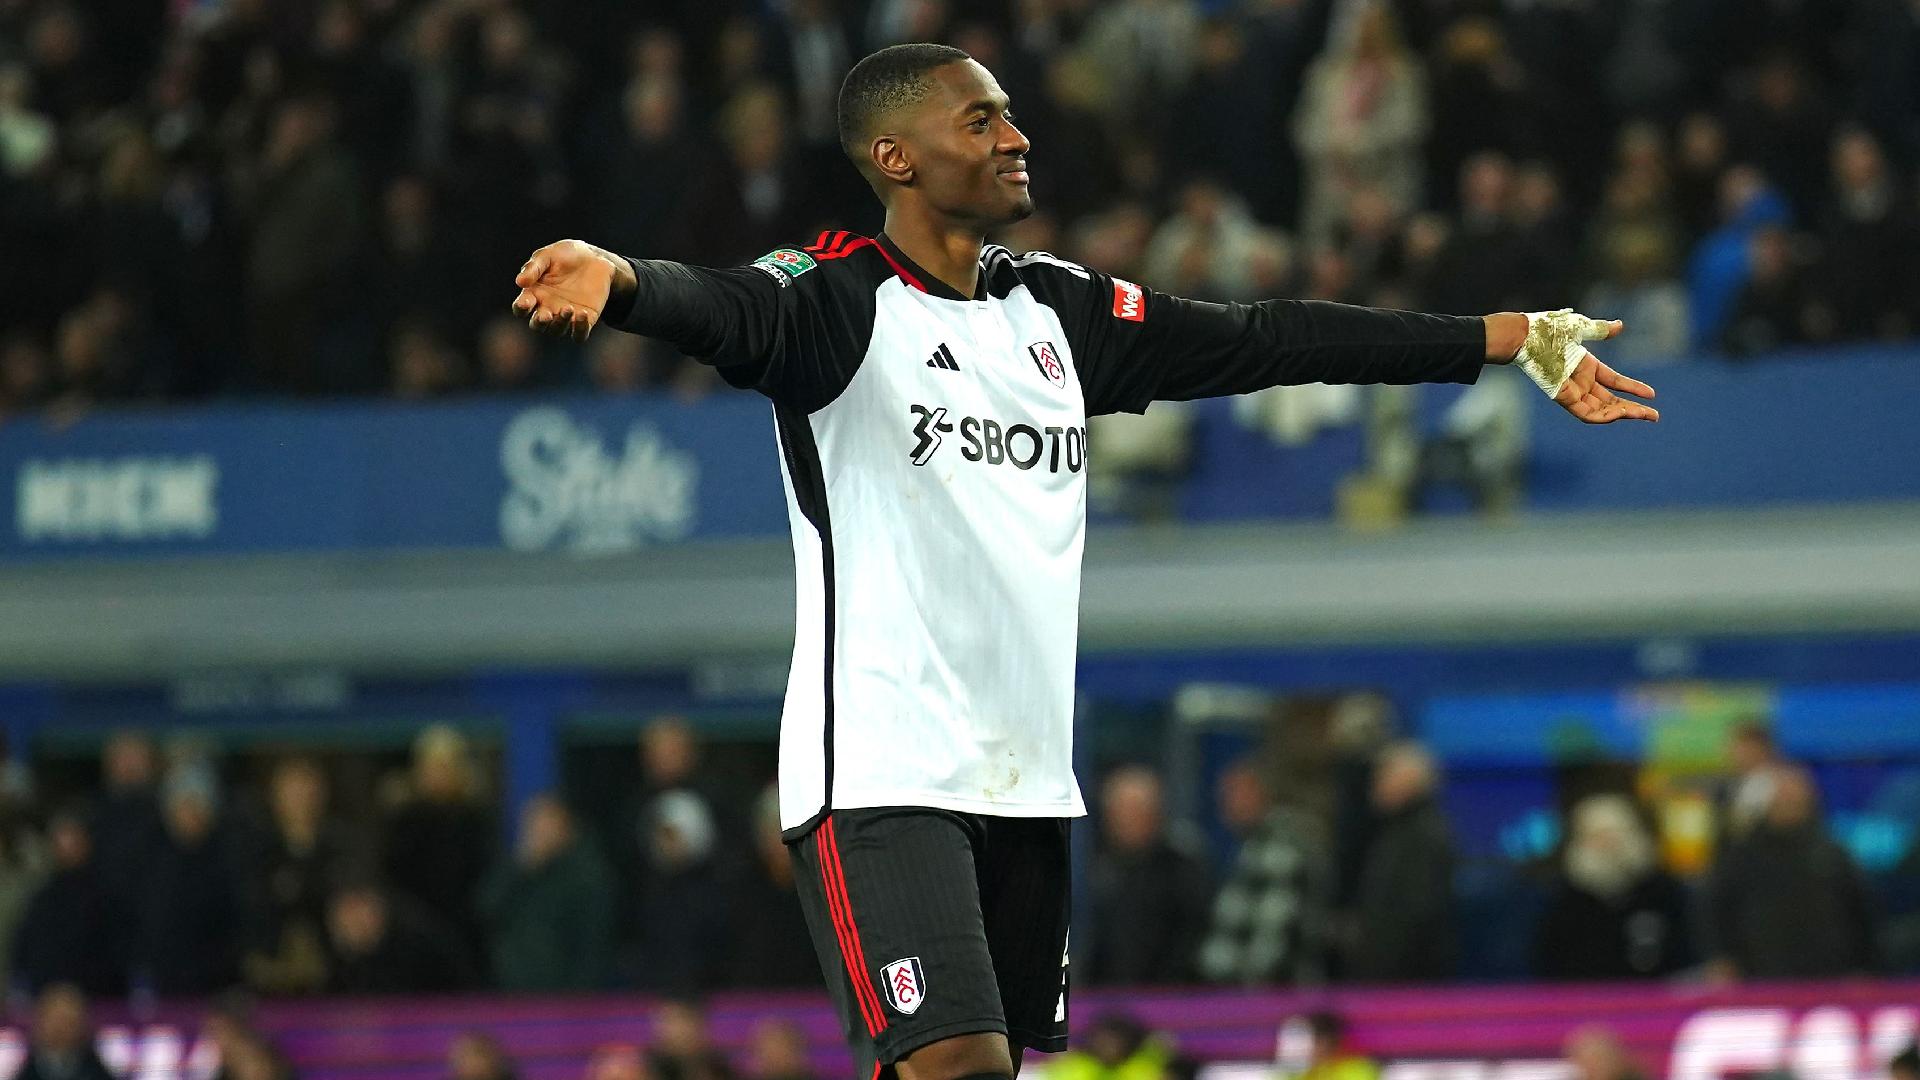 Premier League Club, Fulham have confirmed that Defender, Tosin Adarabioyo has left the club on a free transfer. Adarabioyo’s departure